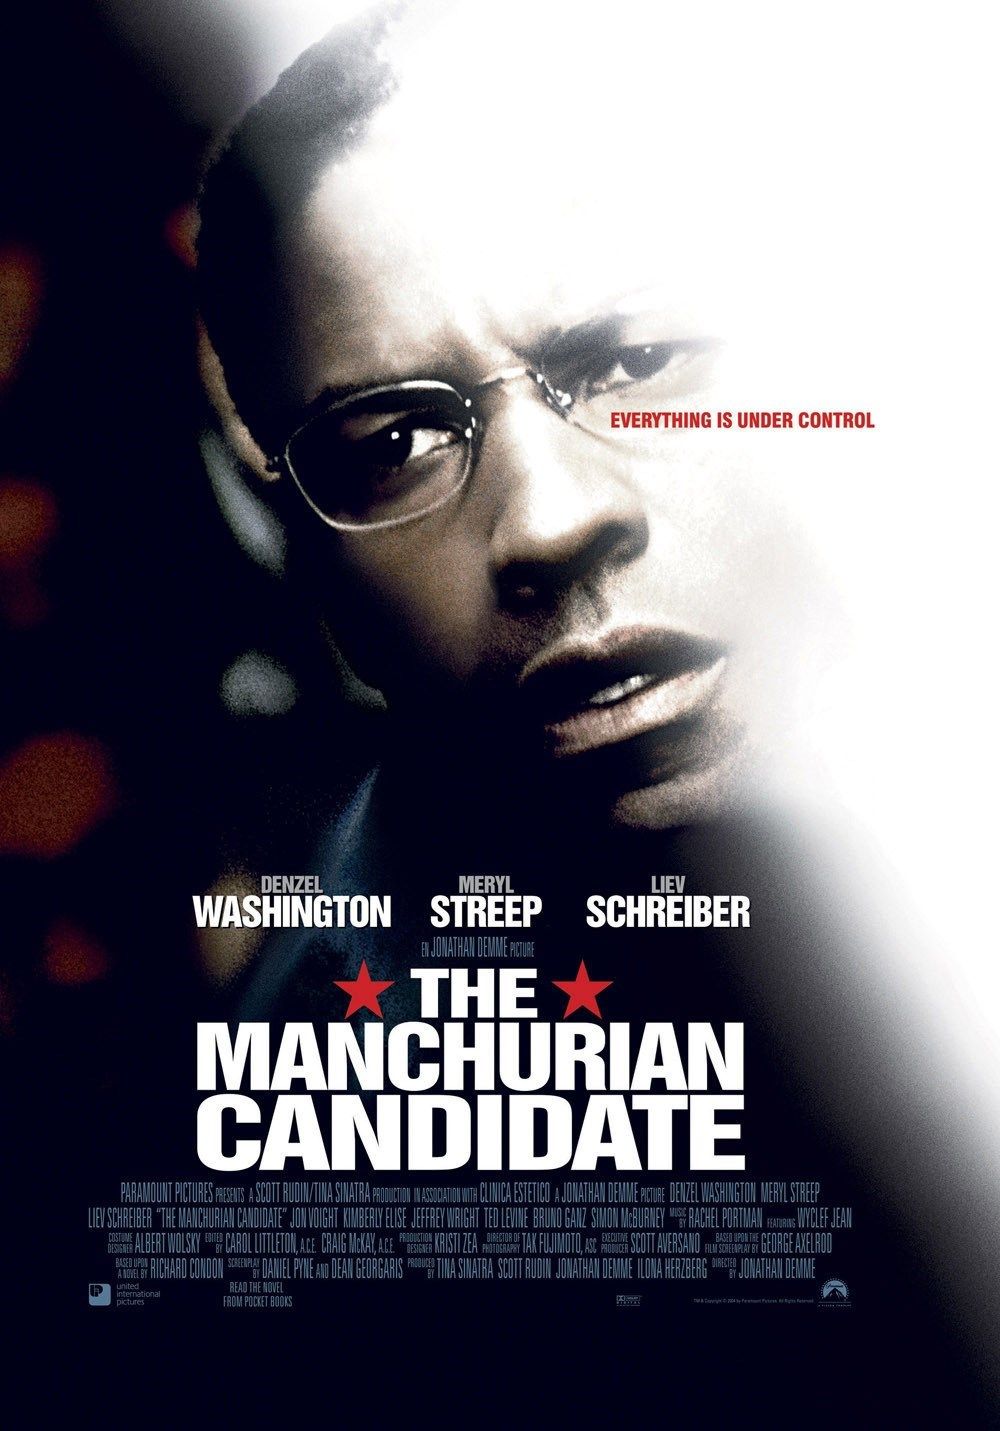 The Manchurian Candidate 2004 Film Poster